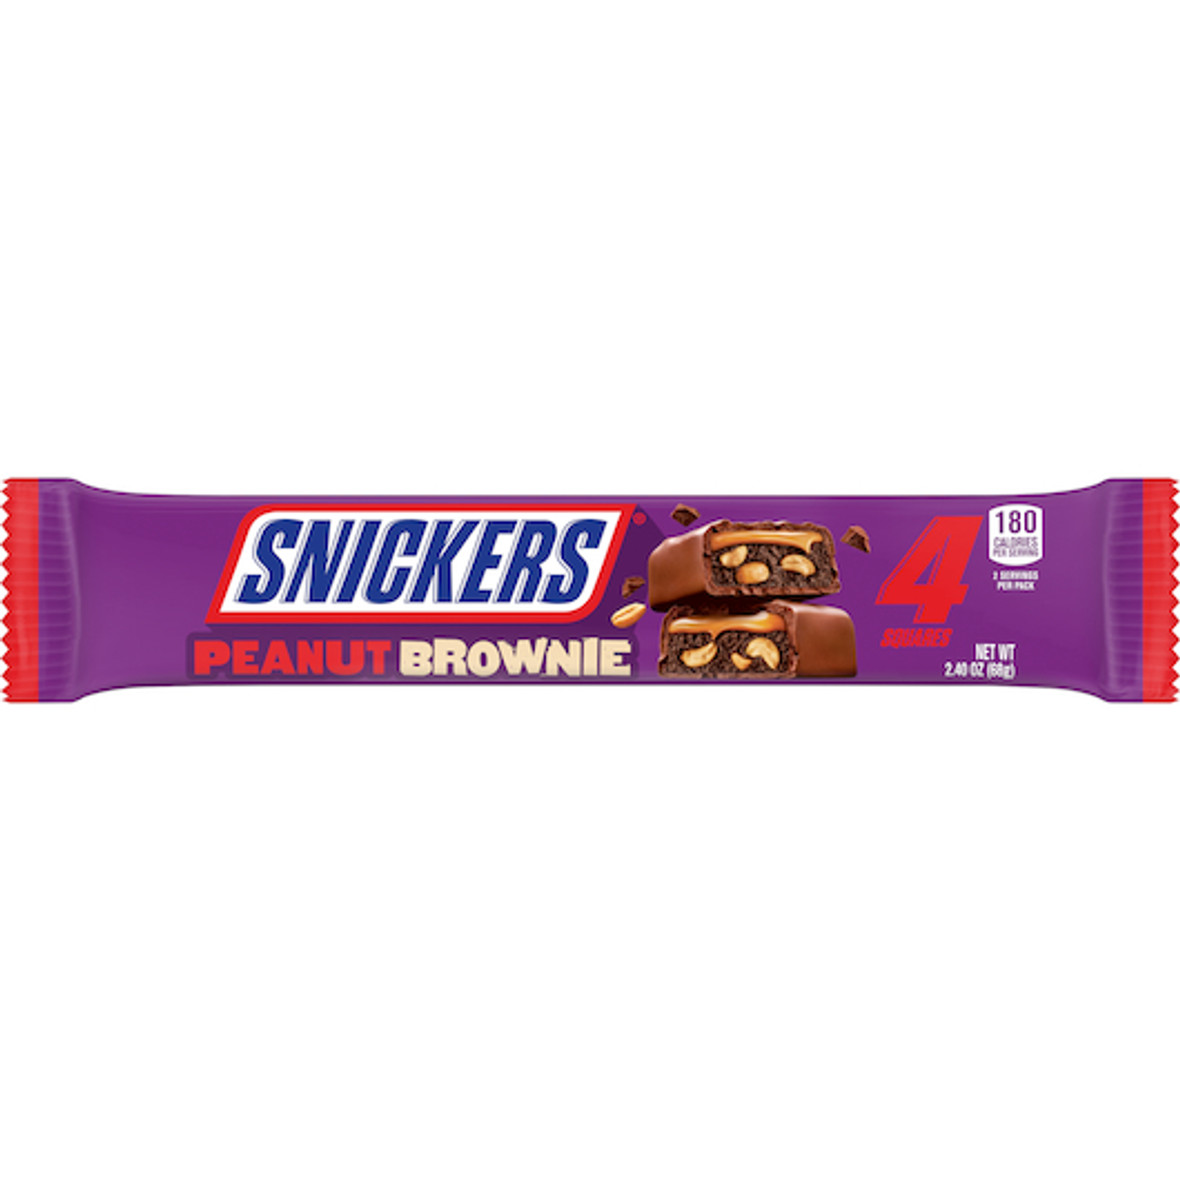 Snickers Peanut Brownie Bar Share Size, 2.4 Ounce, 24 Per Box, 6 Per Case